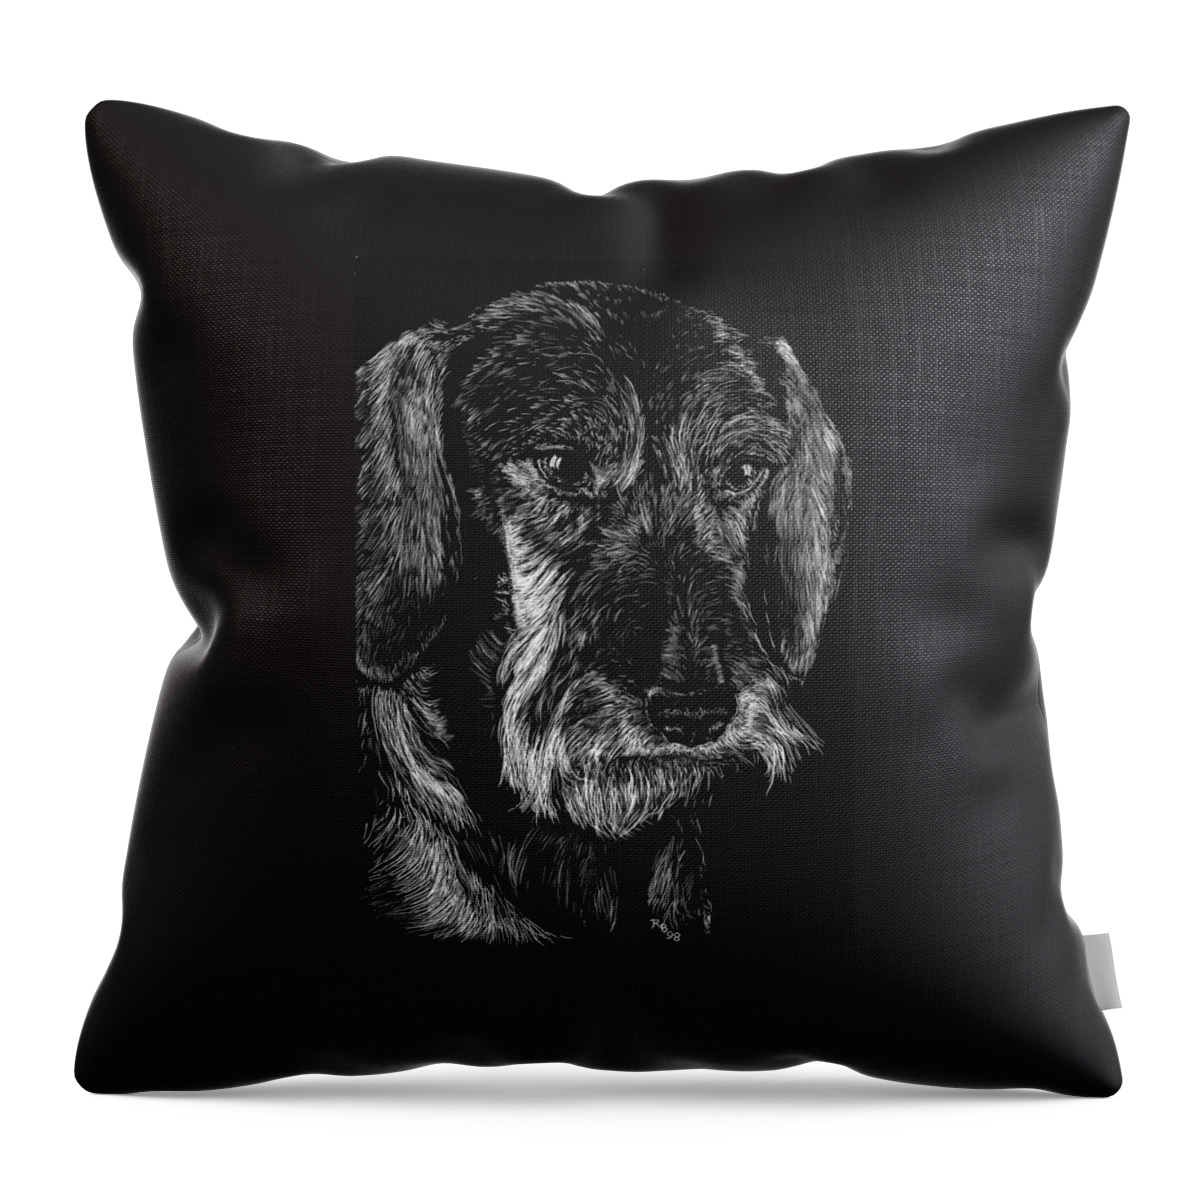 Dachshund Throw Pillow featuring the drawing Wire Haired Dachshund by Rachel Bochnia